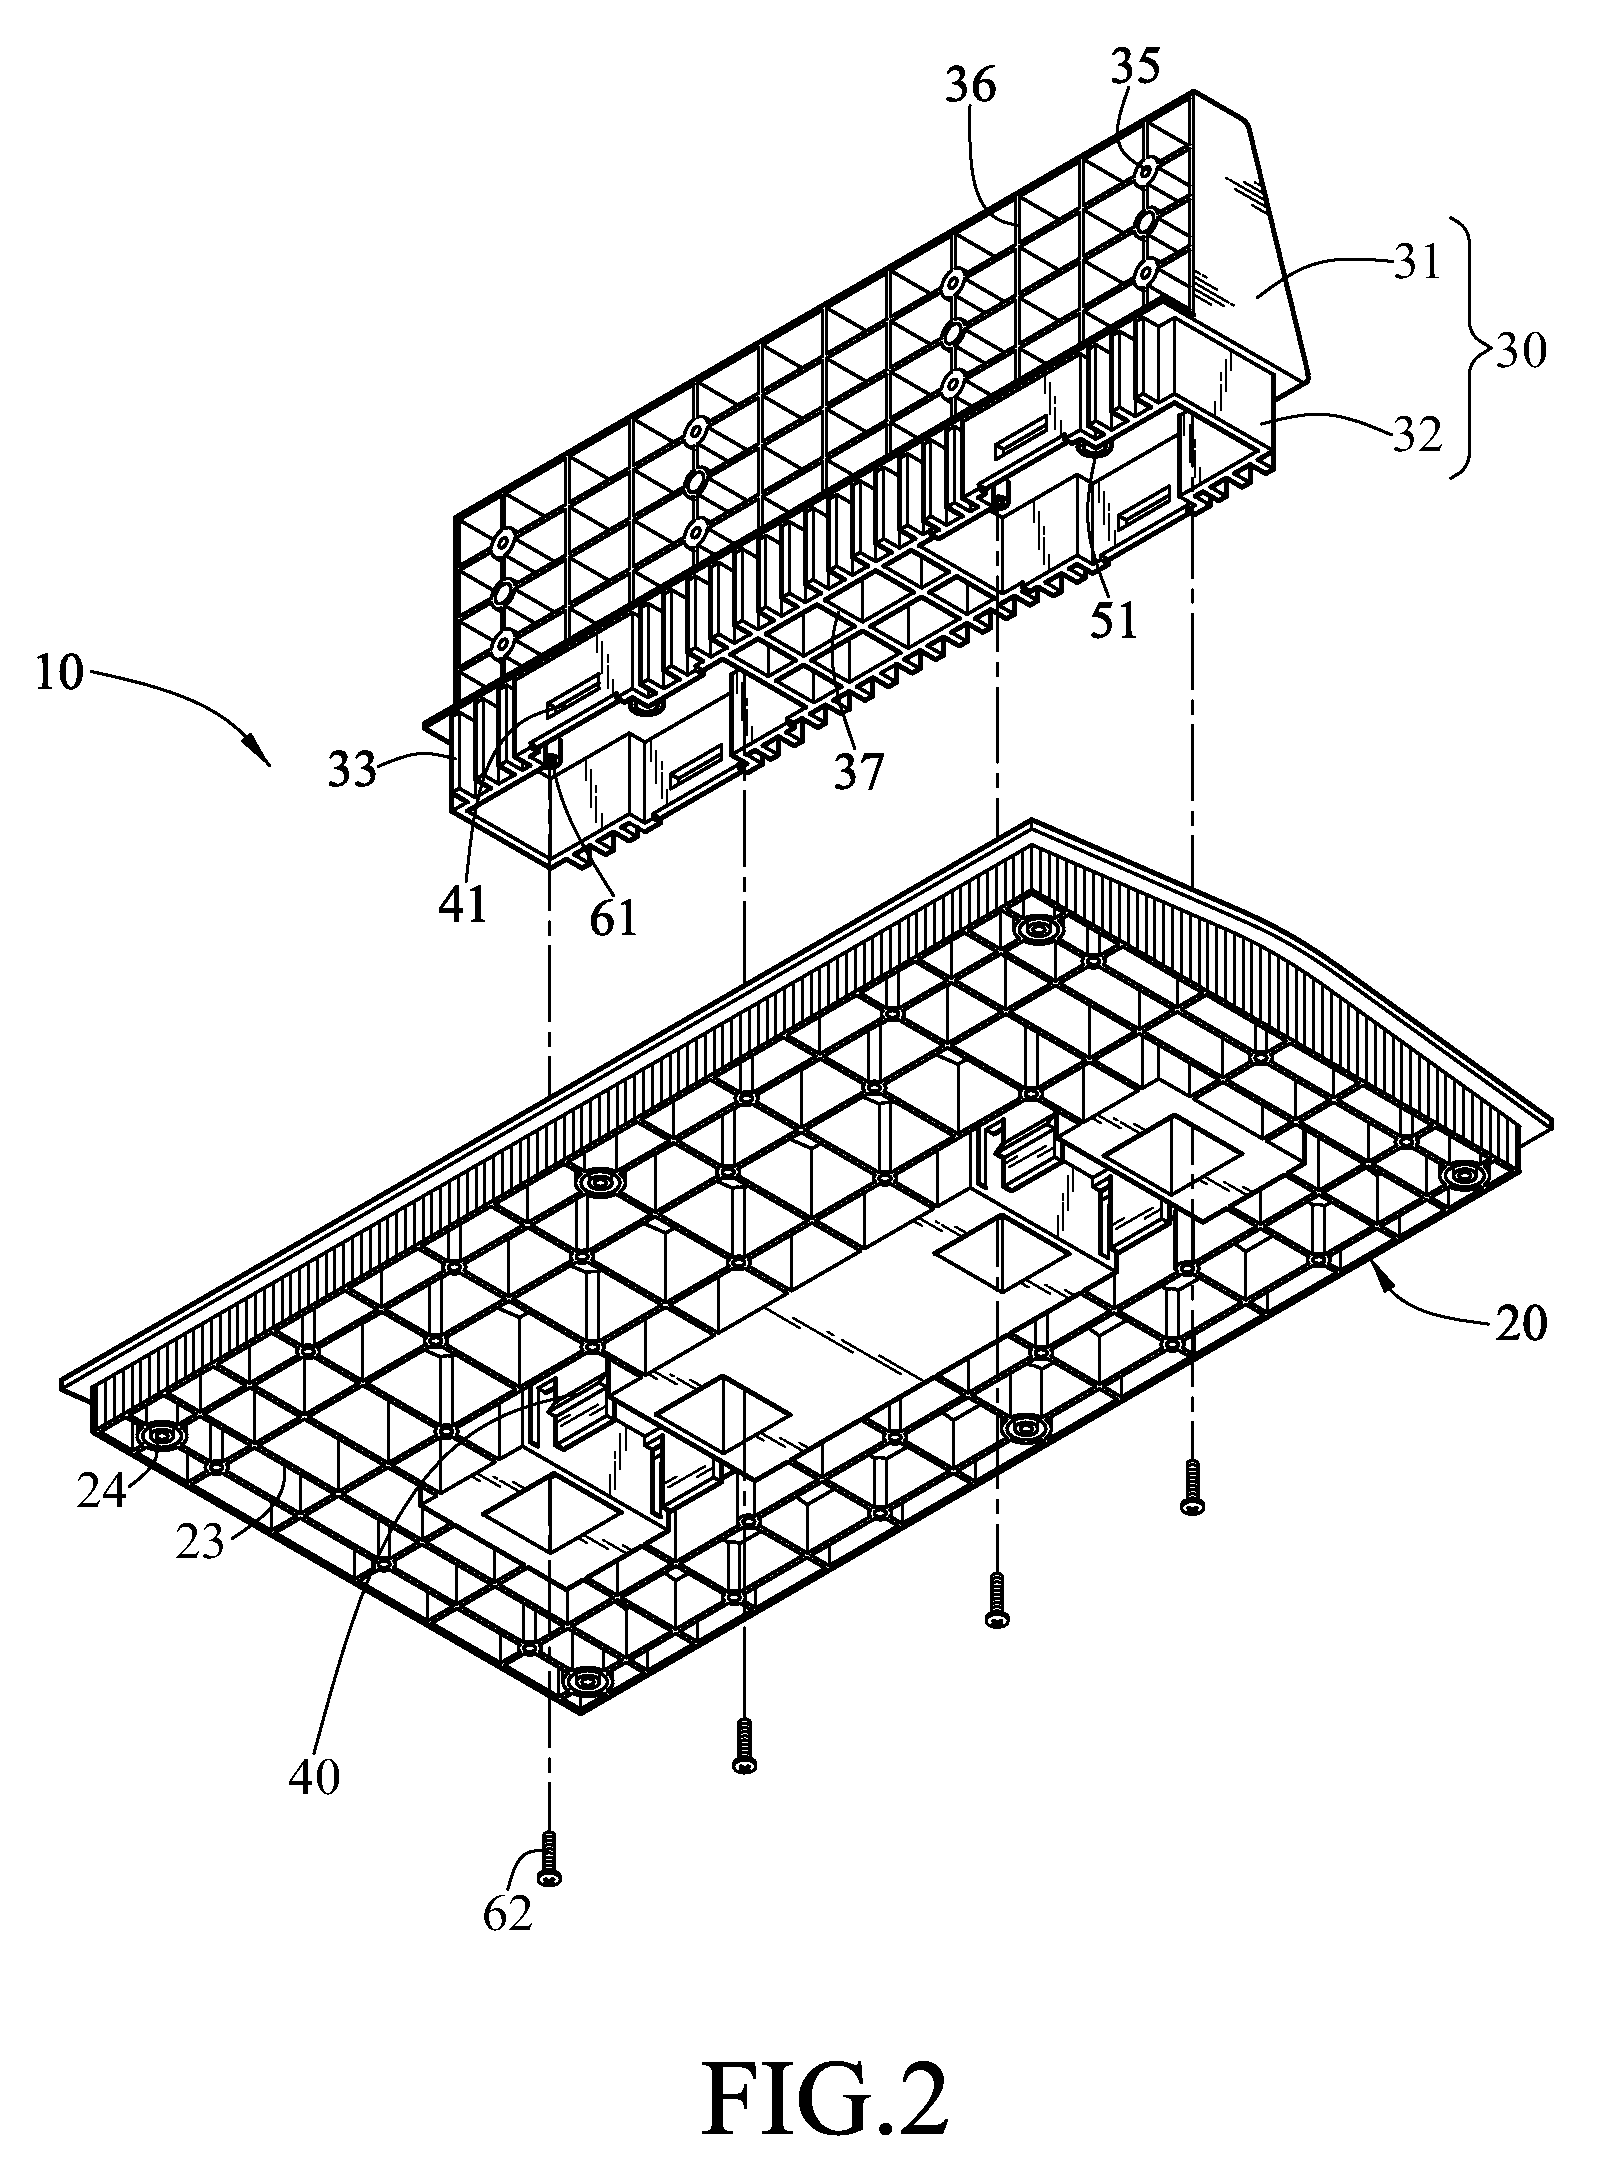 Mount structure